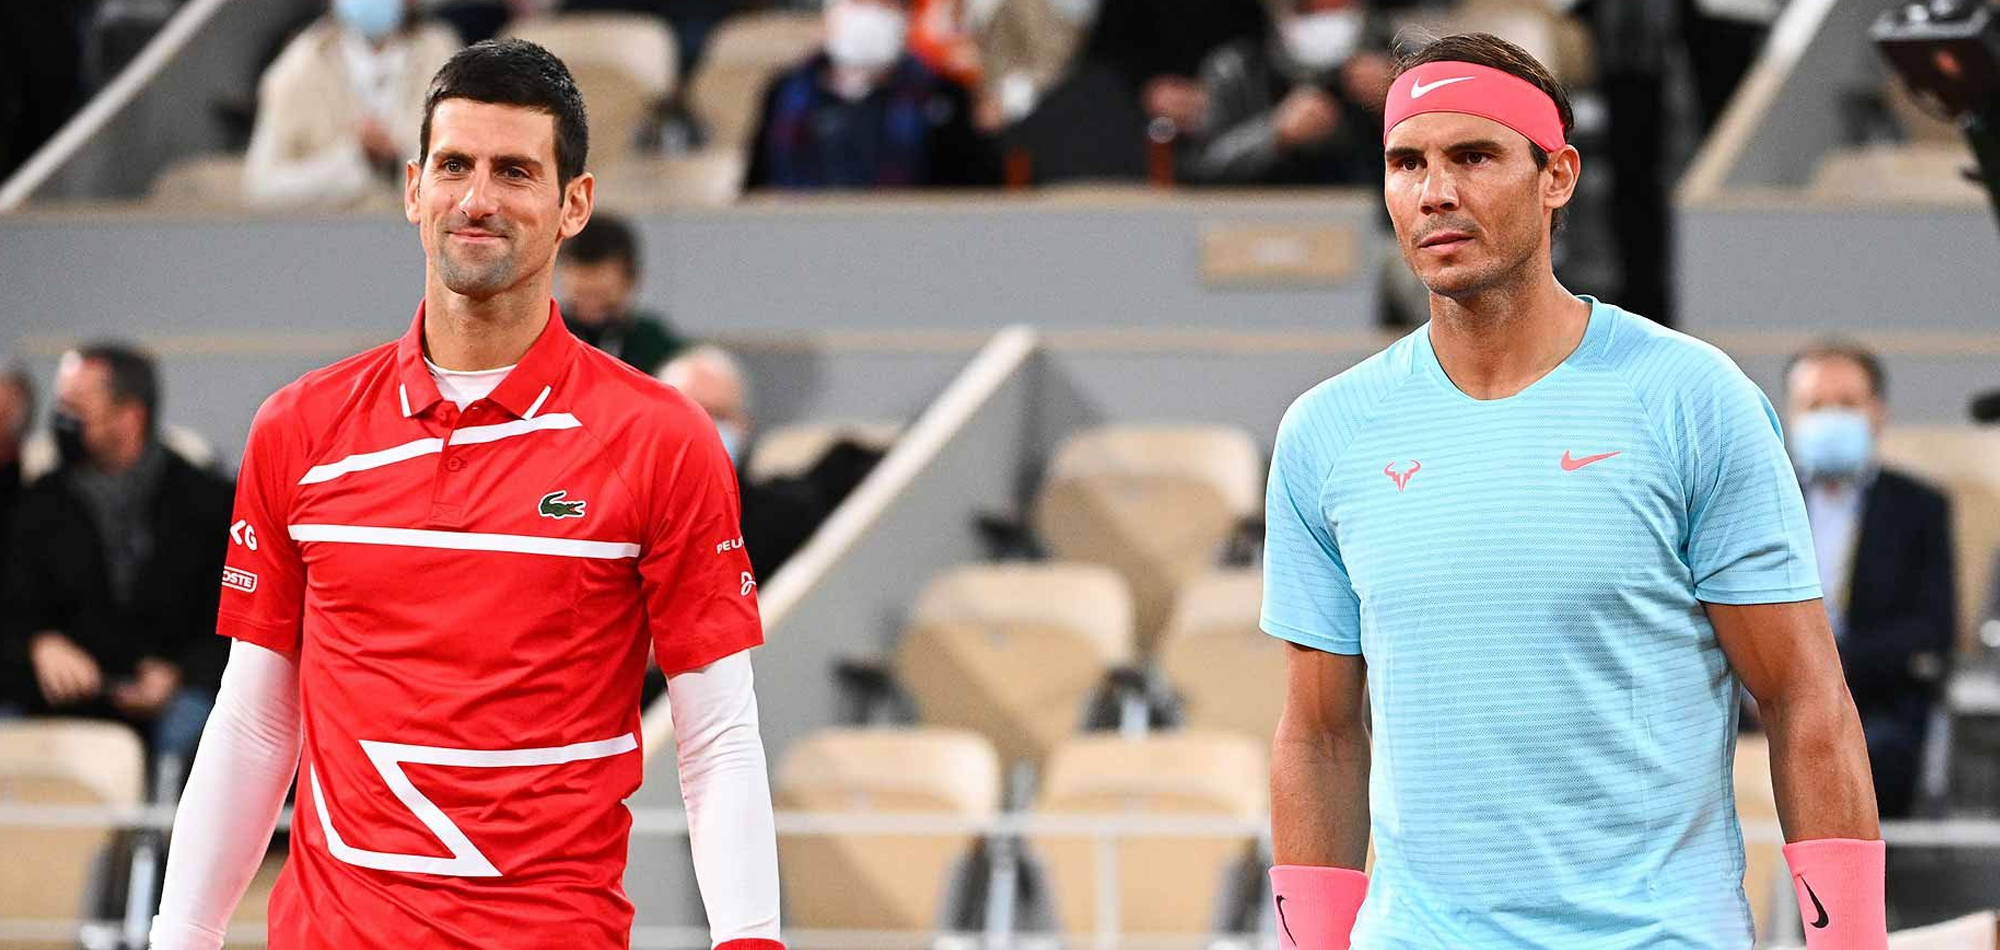 Djokovic ready to face ‘biggest rival’ Nadal for 58th time